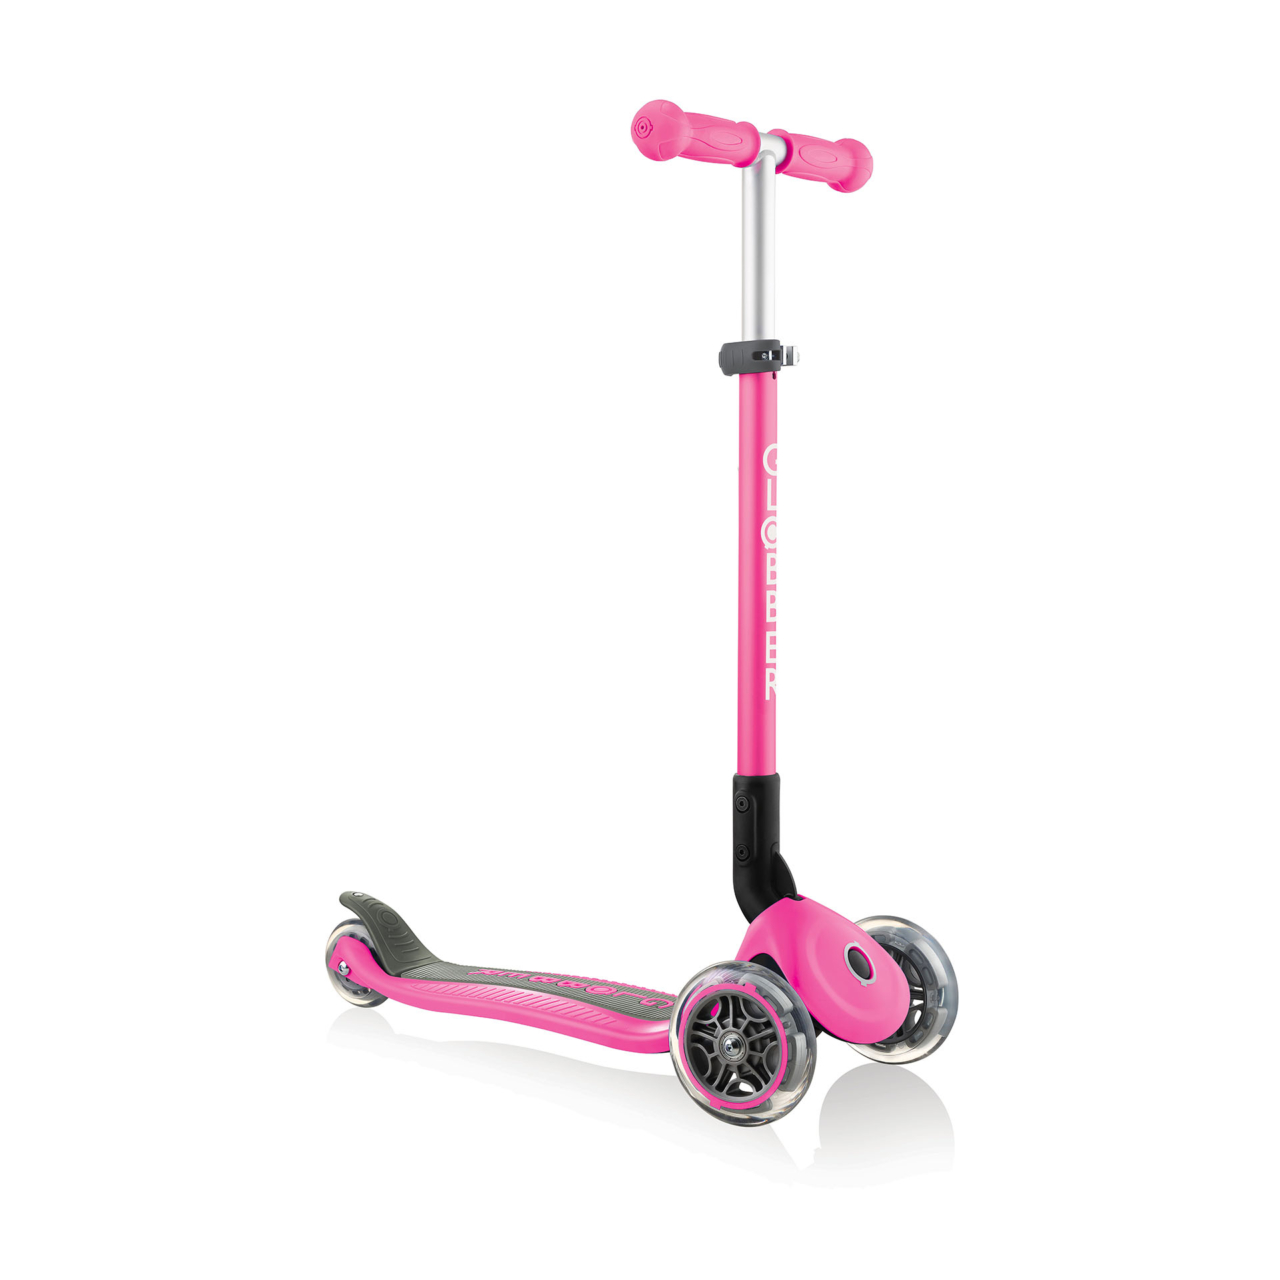 430 110 2 Collapsible Scooter For 3 Years Old